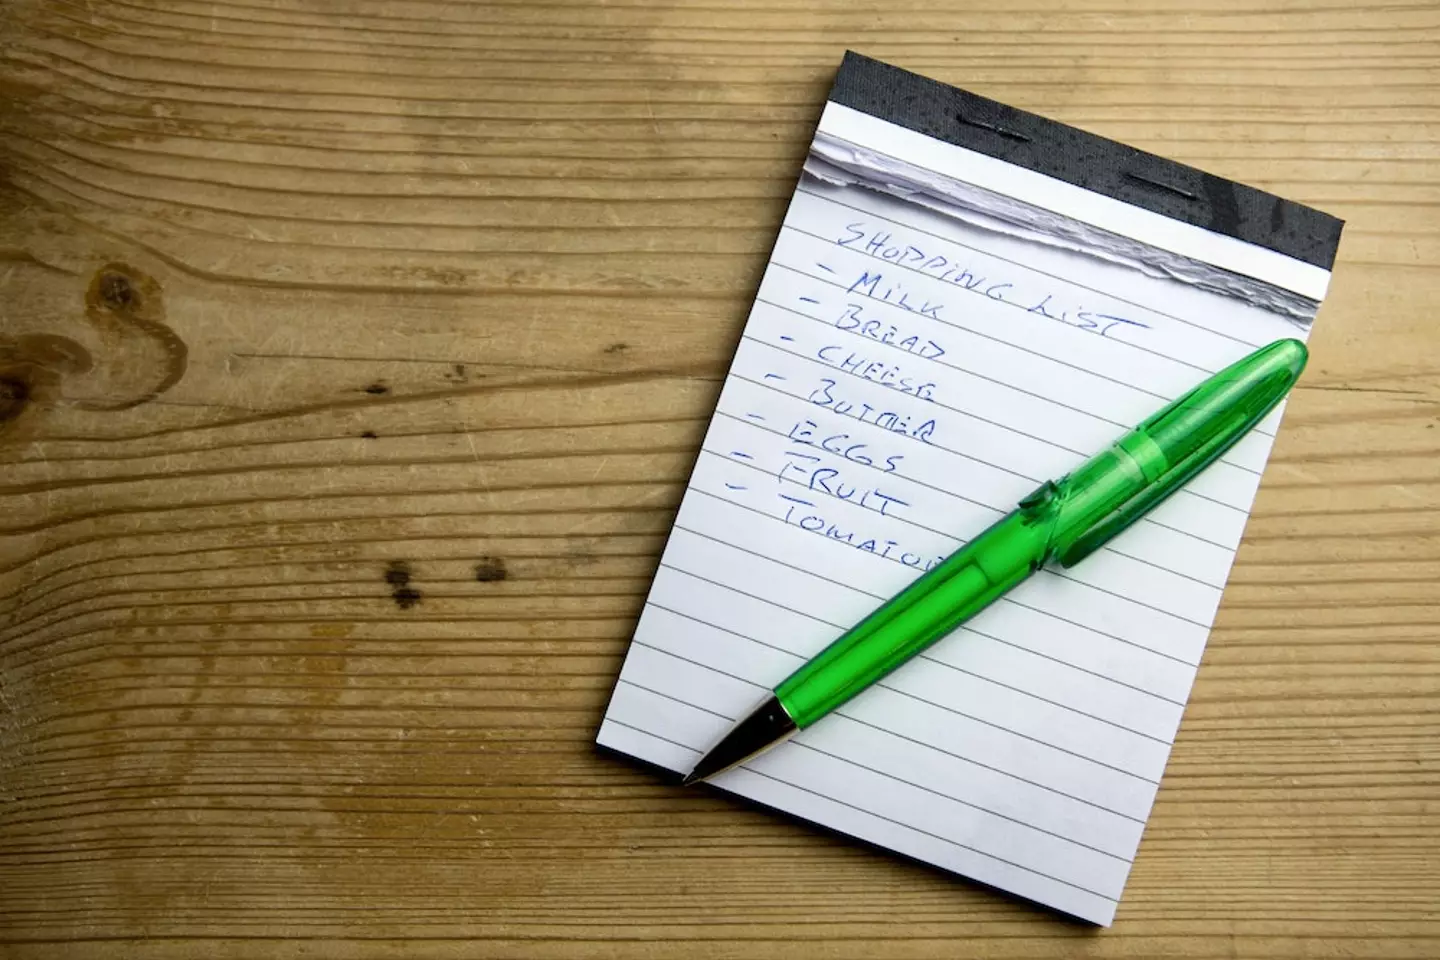 Making lists is a great way to keep on top of spending.